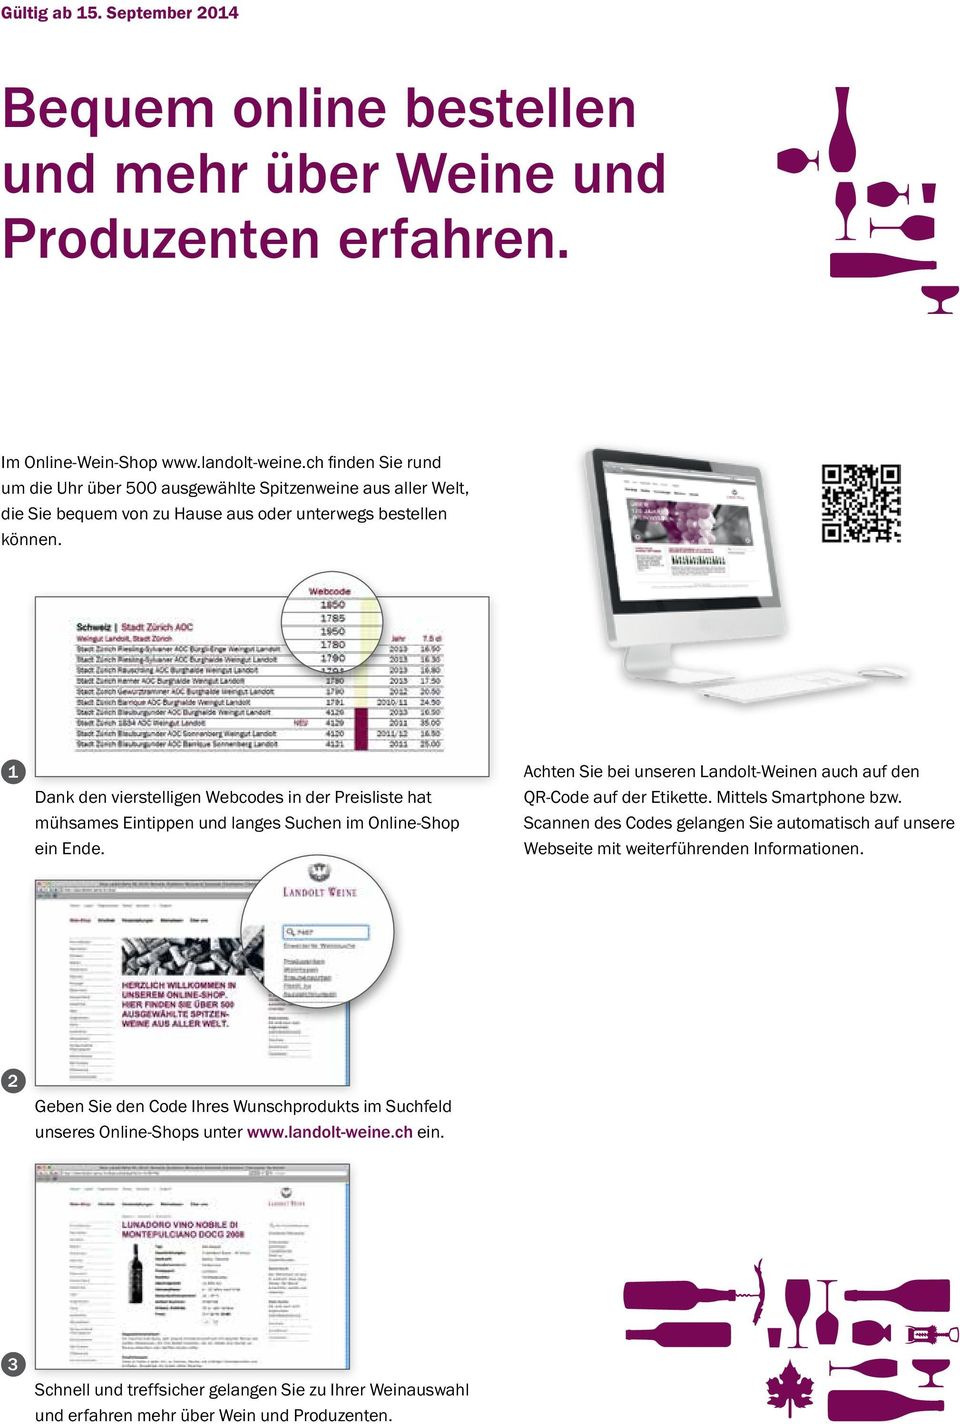 WeinSortiment Free PDF Download 2014/